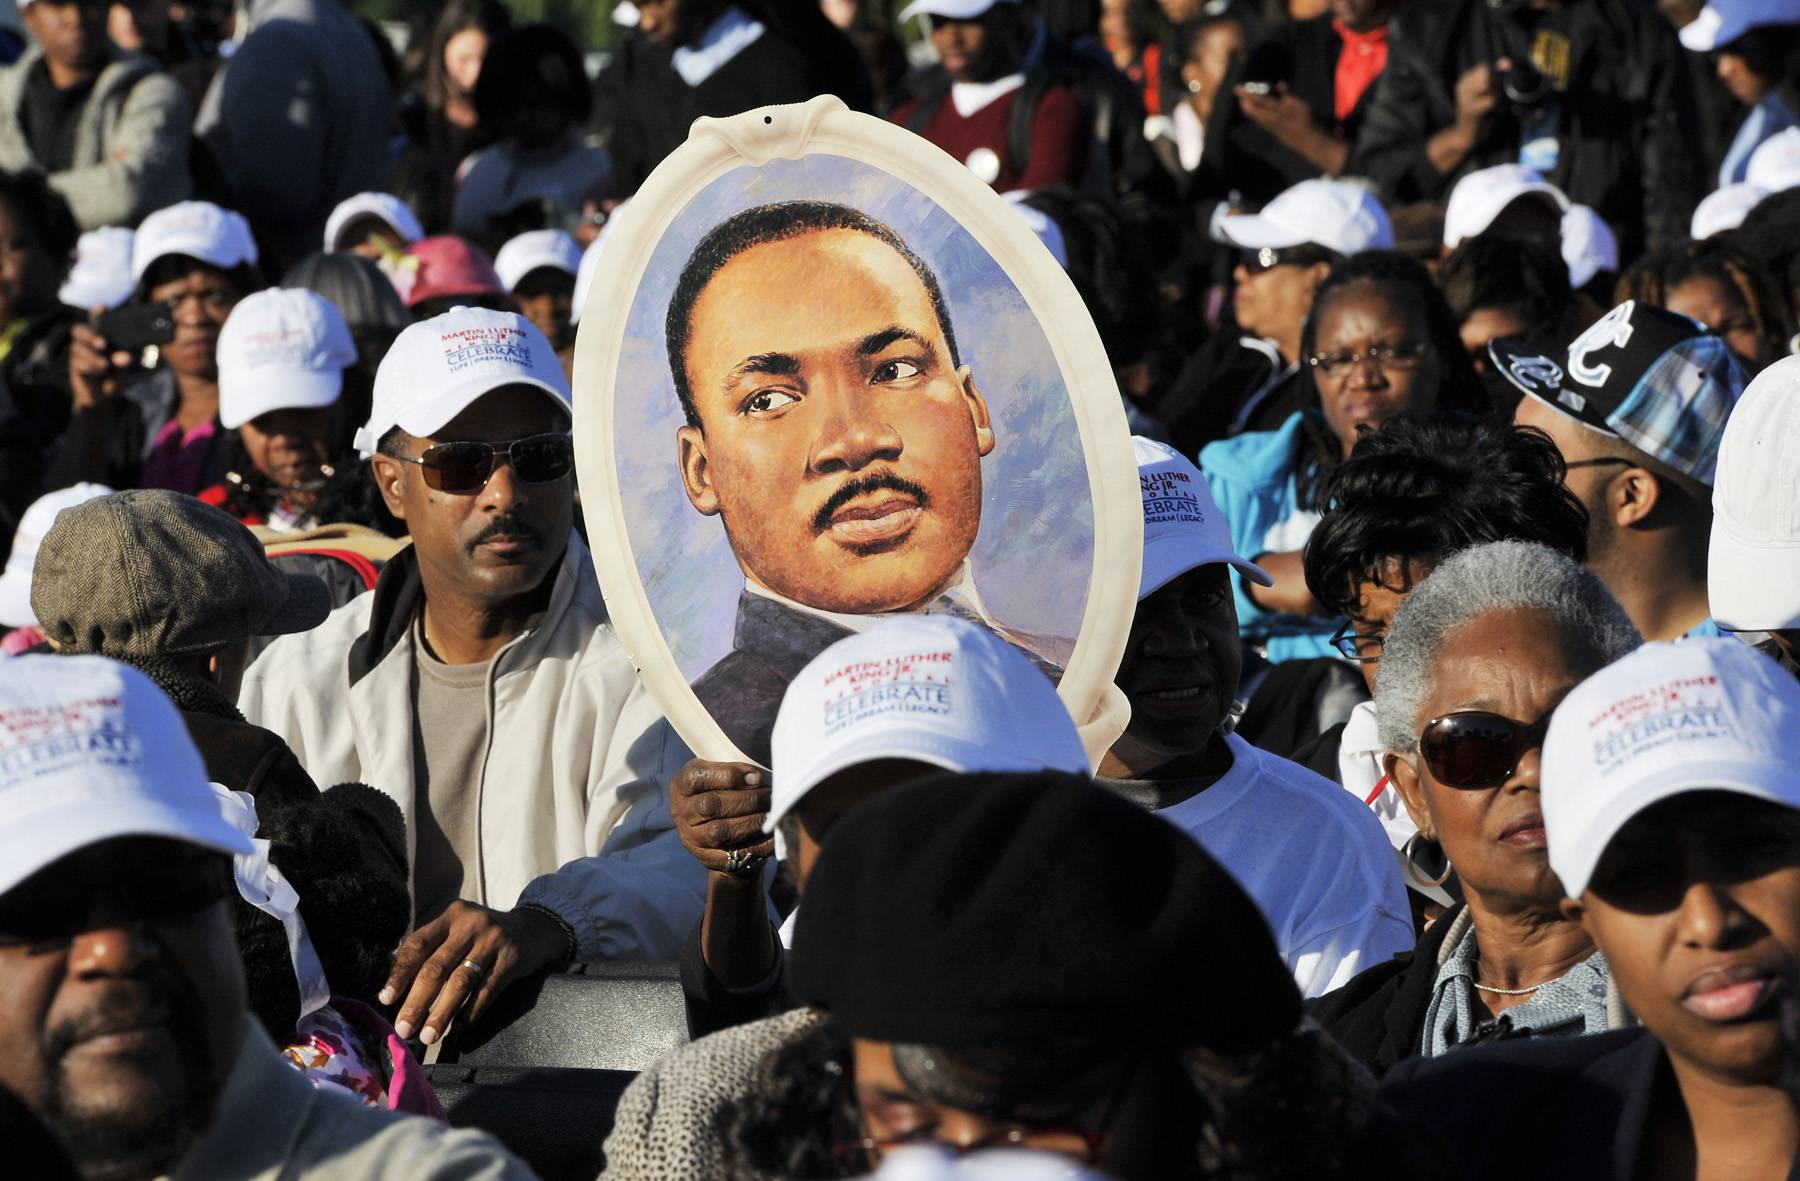 A Homemade Symbol of Peace - People hold up a poster of King.(Photo: MLADEN ANTONOV/AFP/Getty Images)